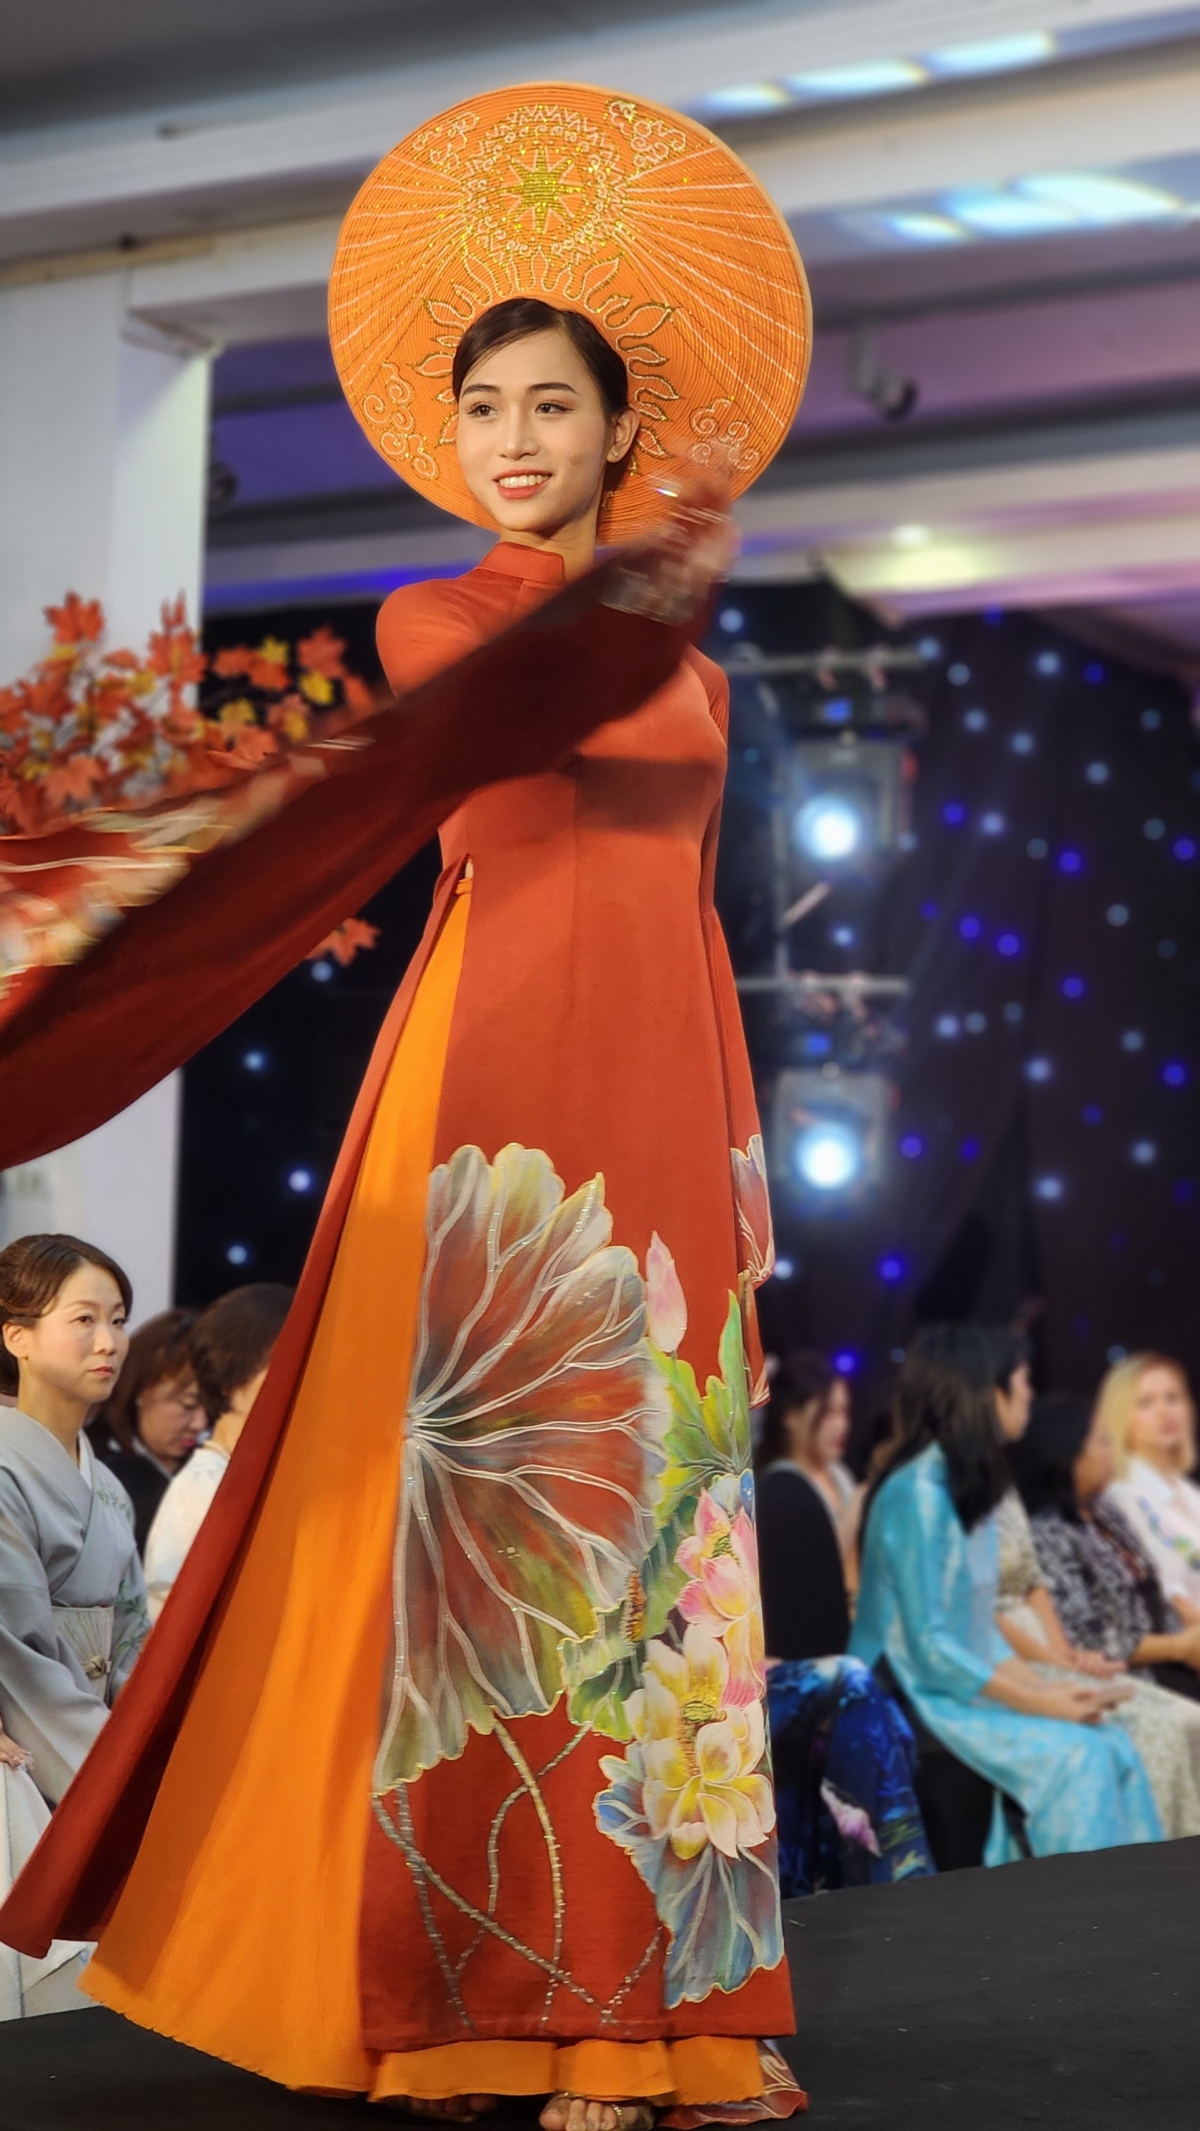 Designer Lan Vy brings a collection of Ten Ao Dai inspired by the lotus flower and Vietnamese legends to the event.